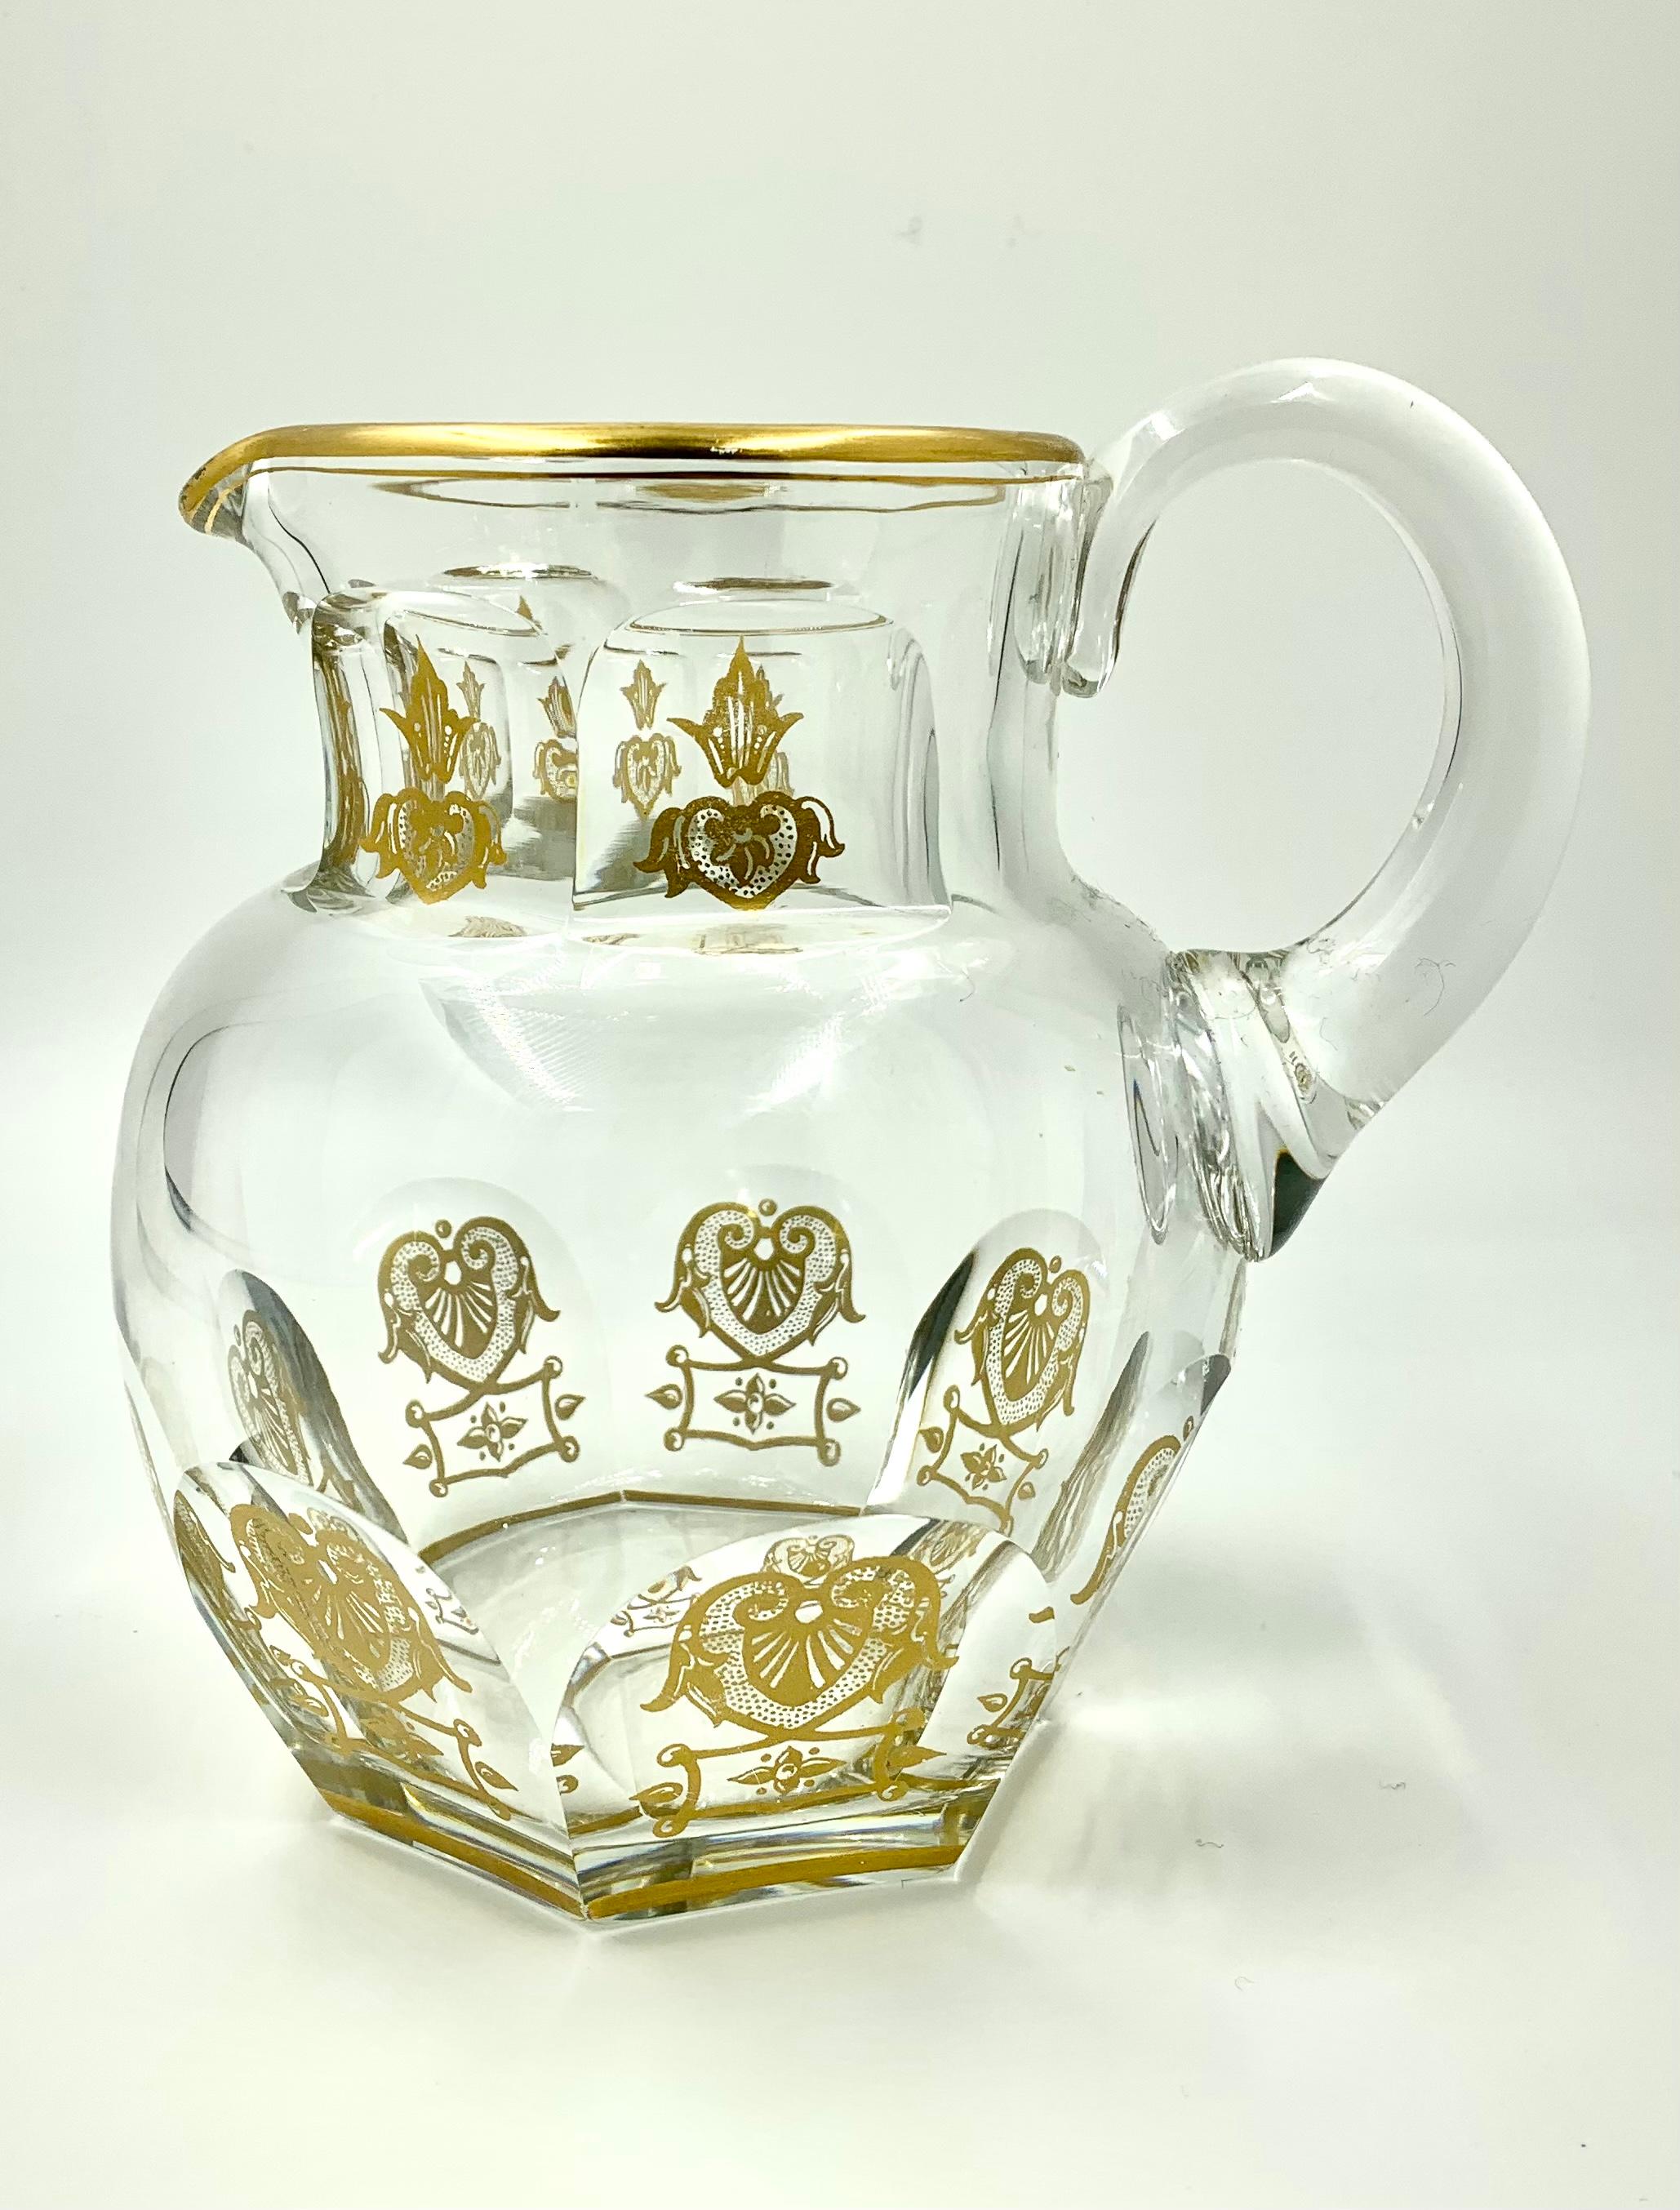 Fine Baccarat Empire Harcourt cocktail/water pitcher.
The Empire Harcourt pattern is one of Baccarat's most sought after designs. A classic since 1841, it has graced the tables of notable world figures including Kings, Queens, Popes, Film